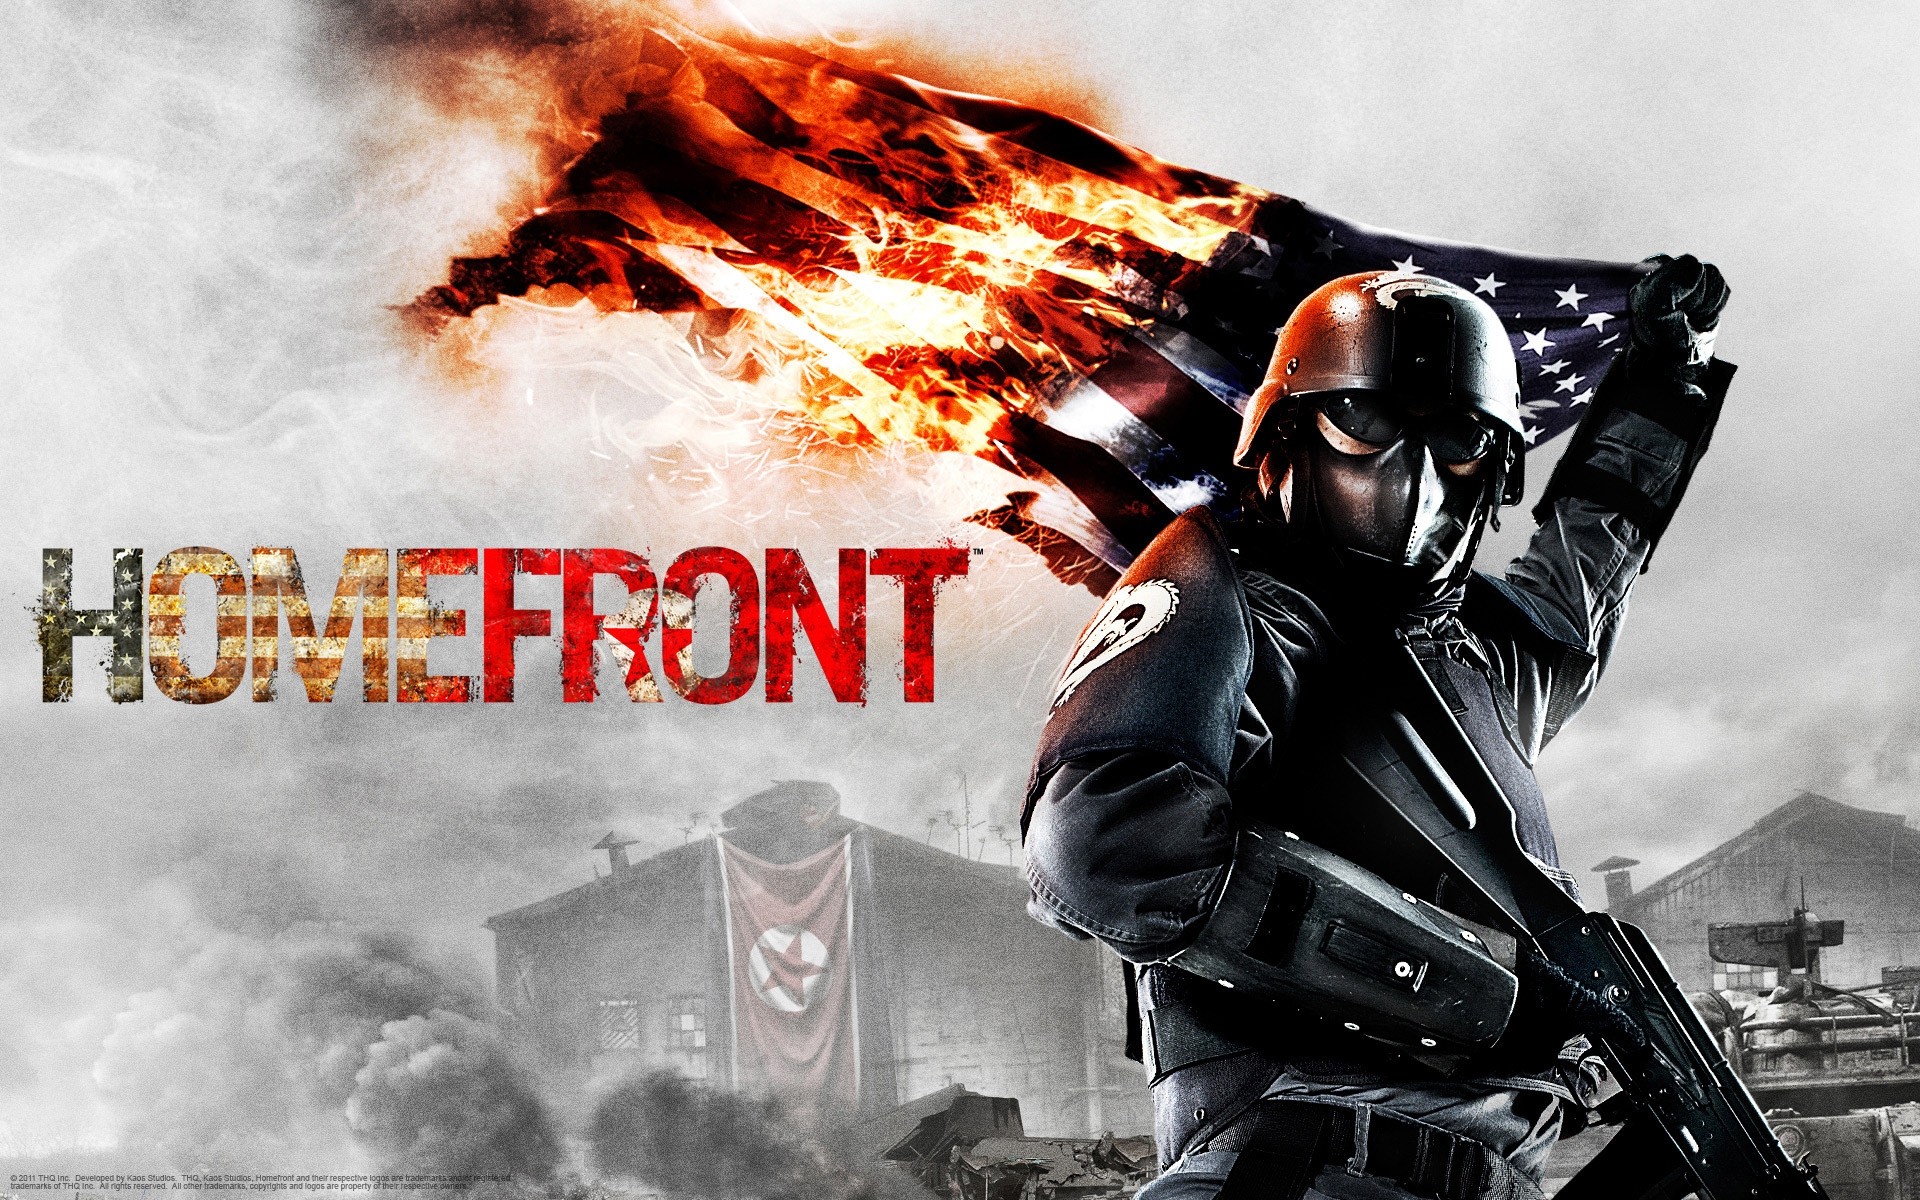 1920x1200px Homefront 848.06 KB #251344